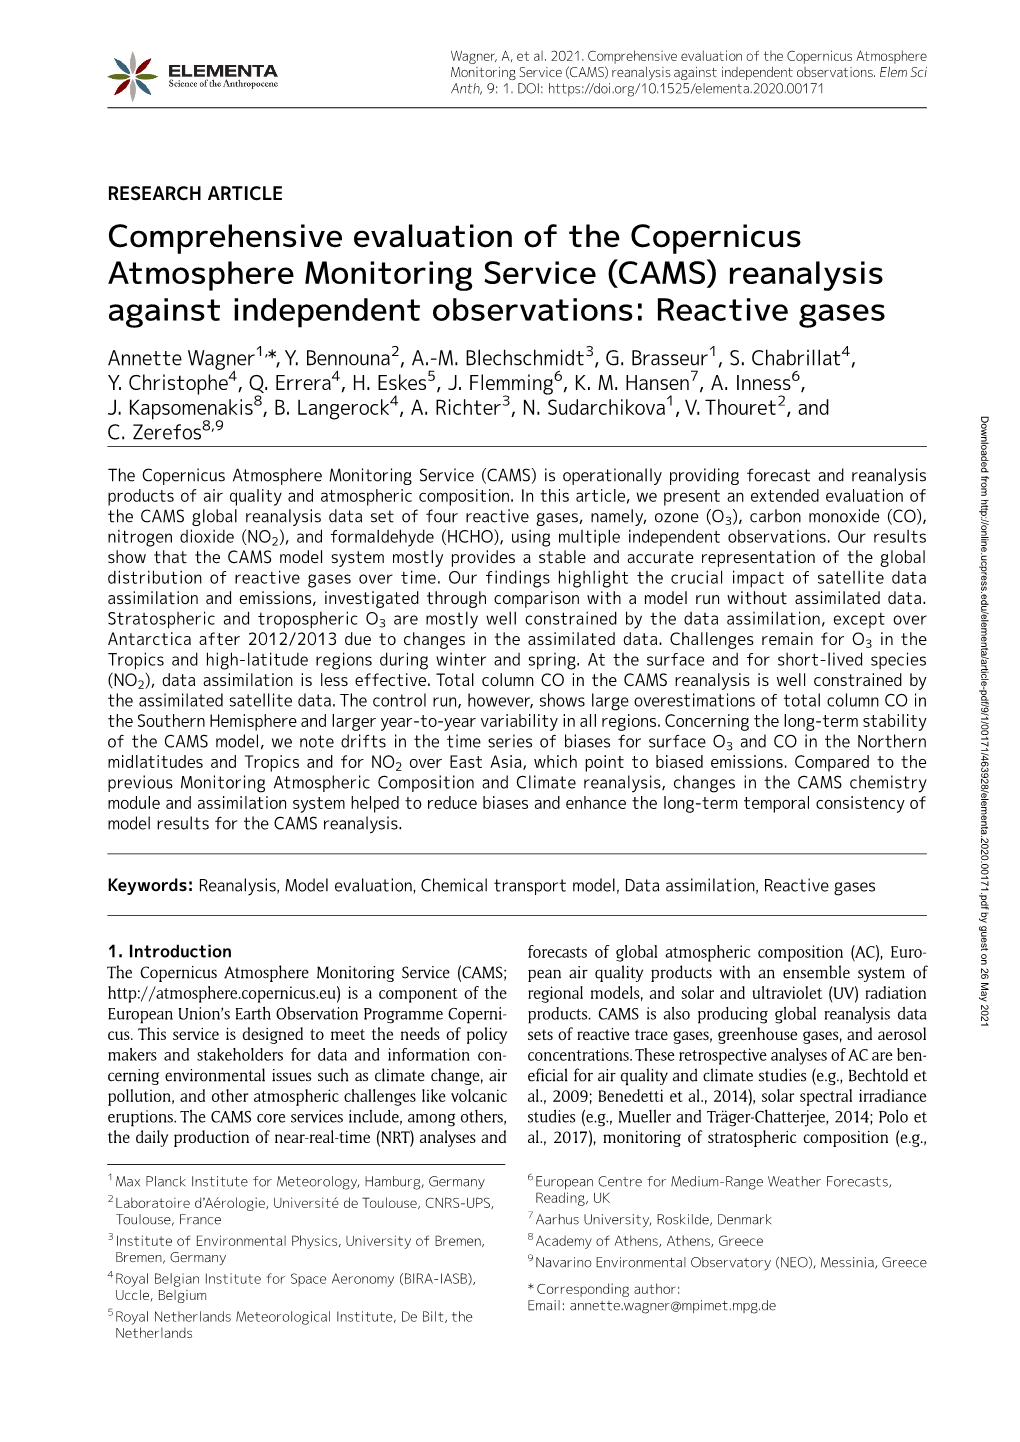 (CAMS) Reanalysis Against Independent Observations: Reactive Gases